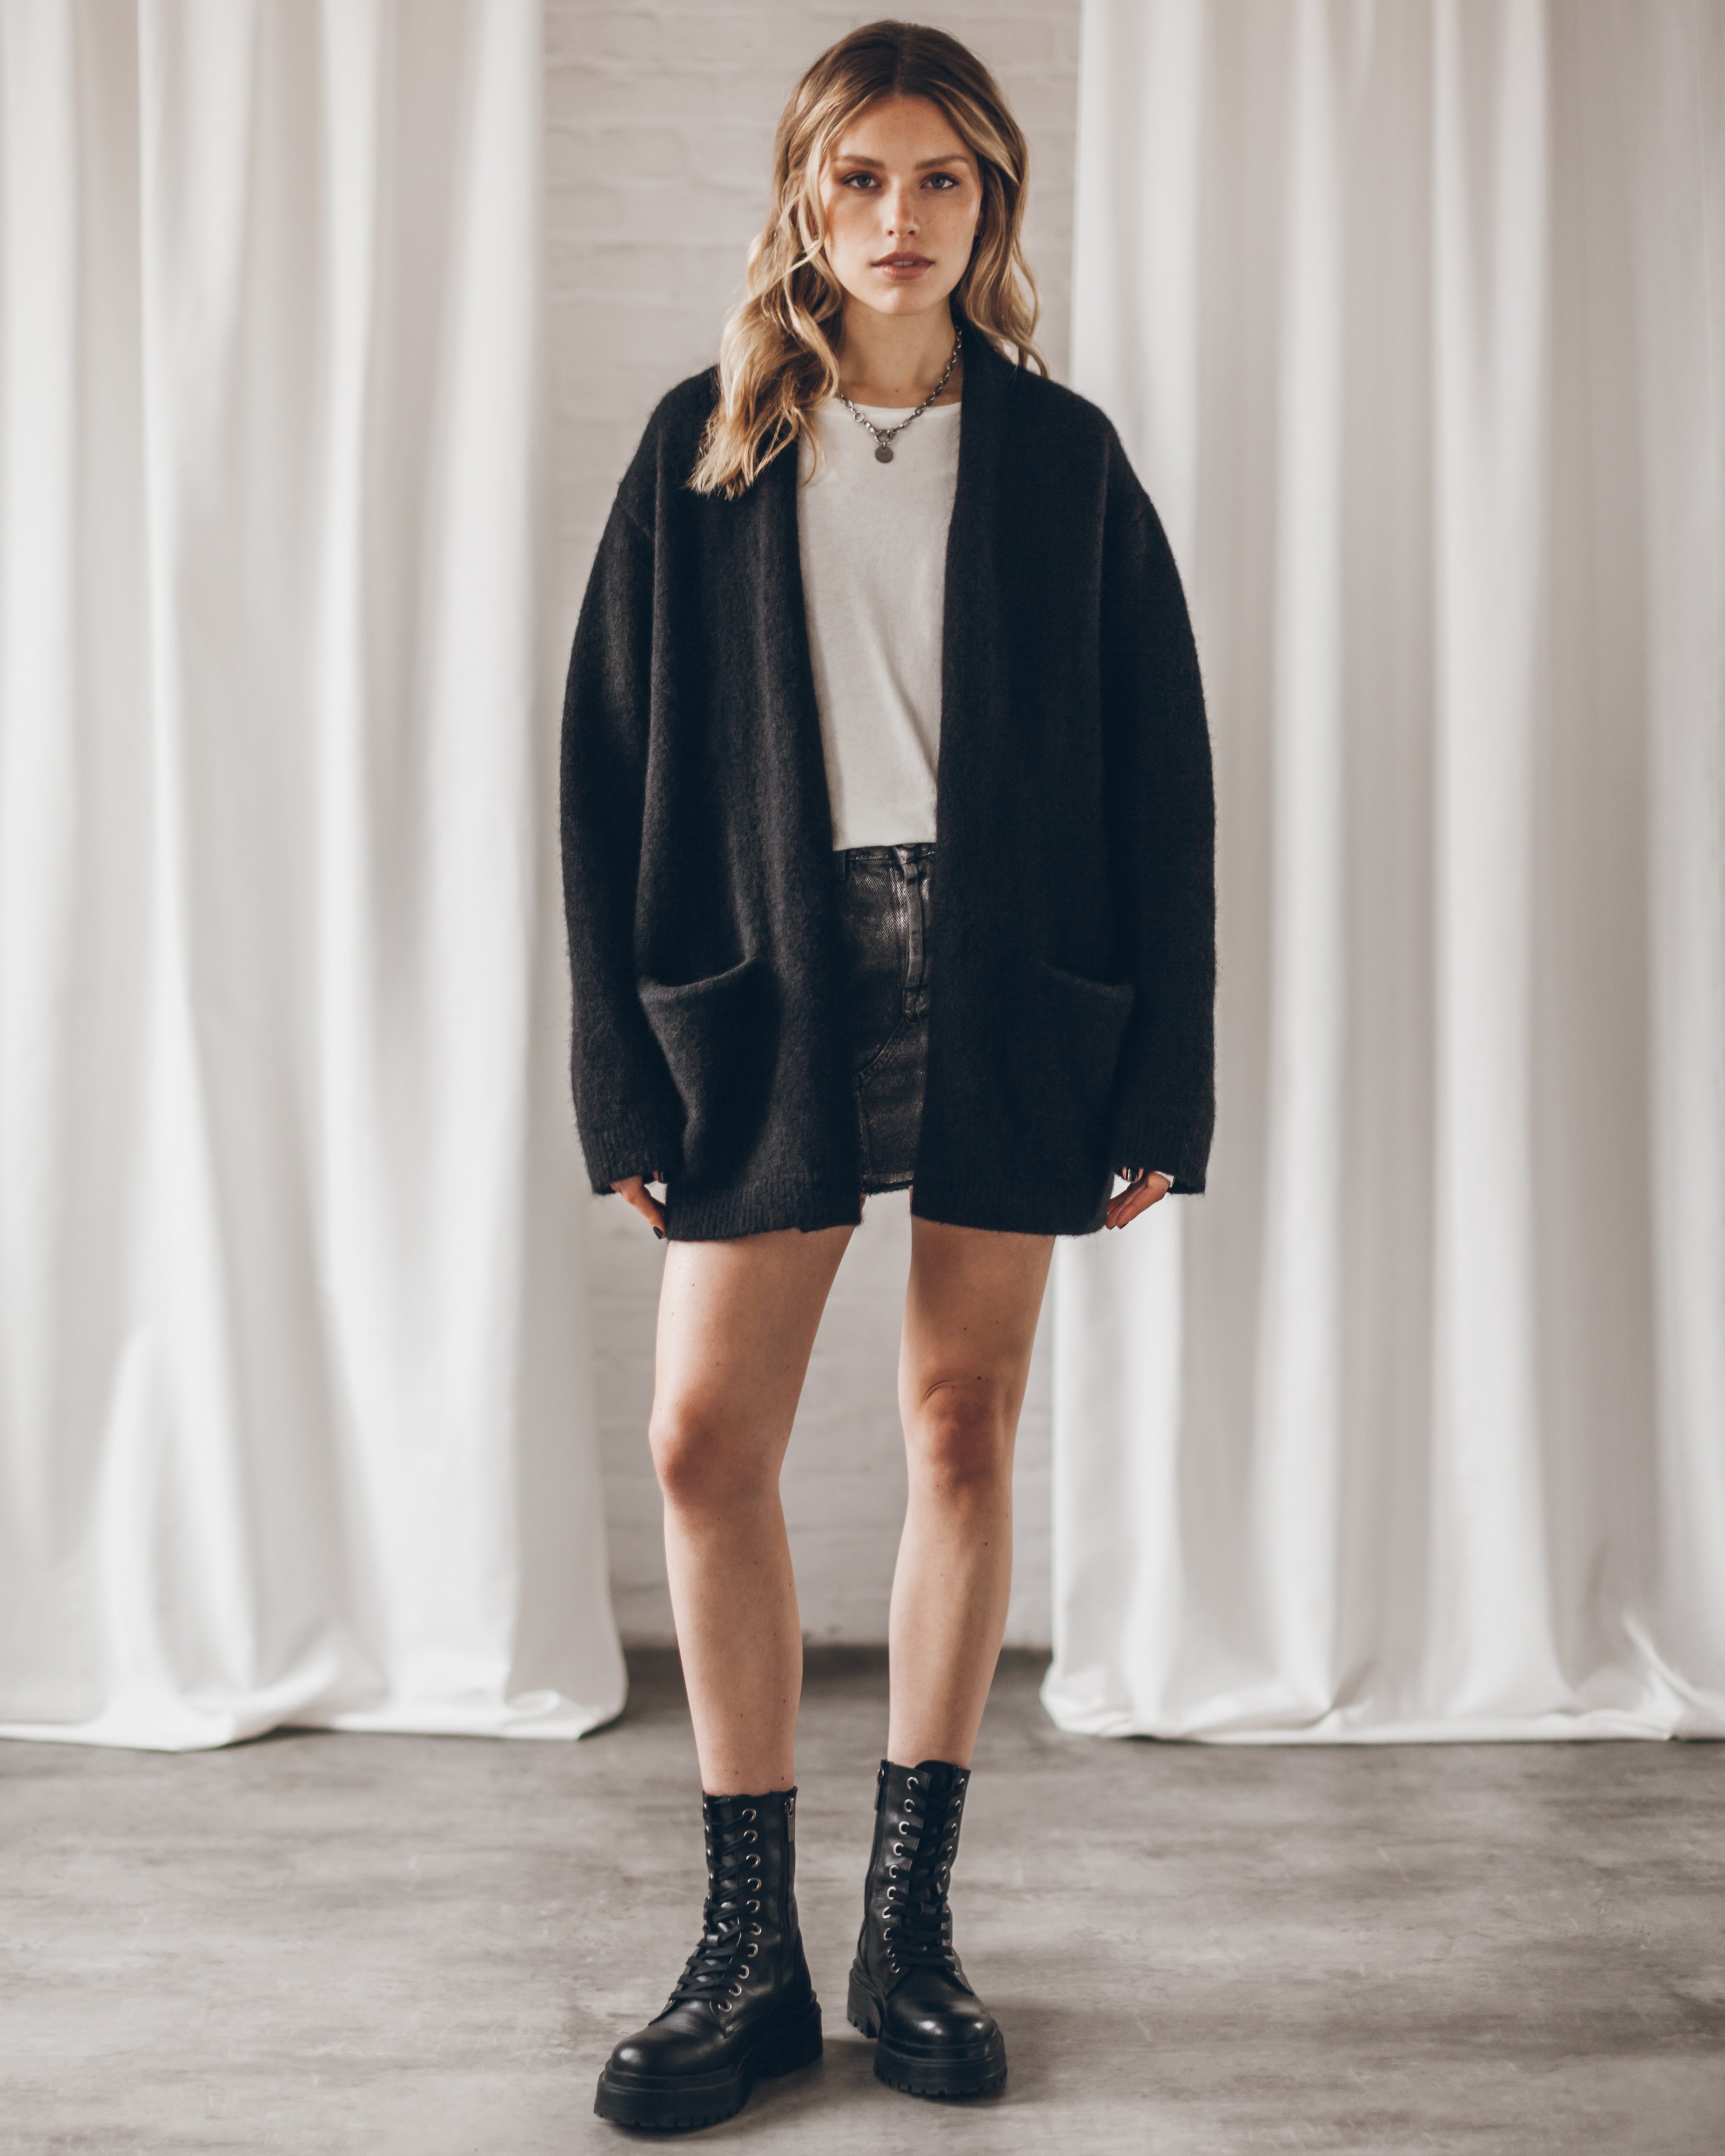 The Black Oversized Knitted Cardigan